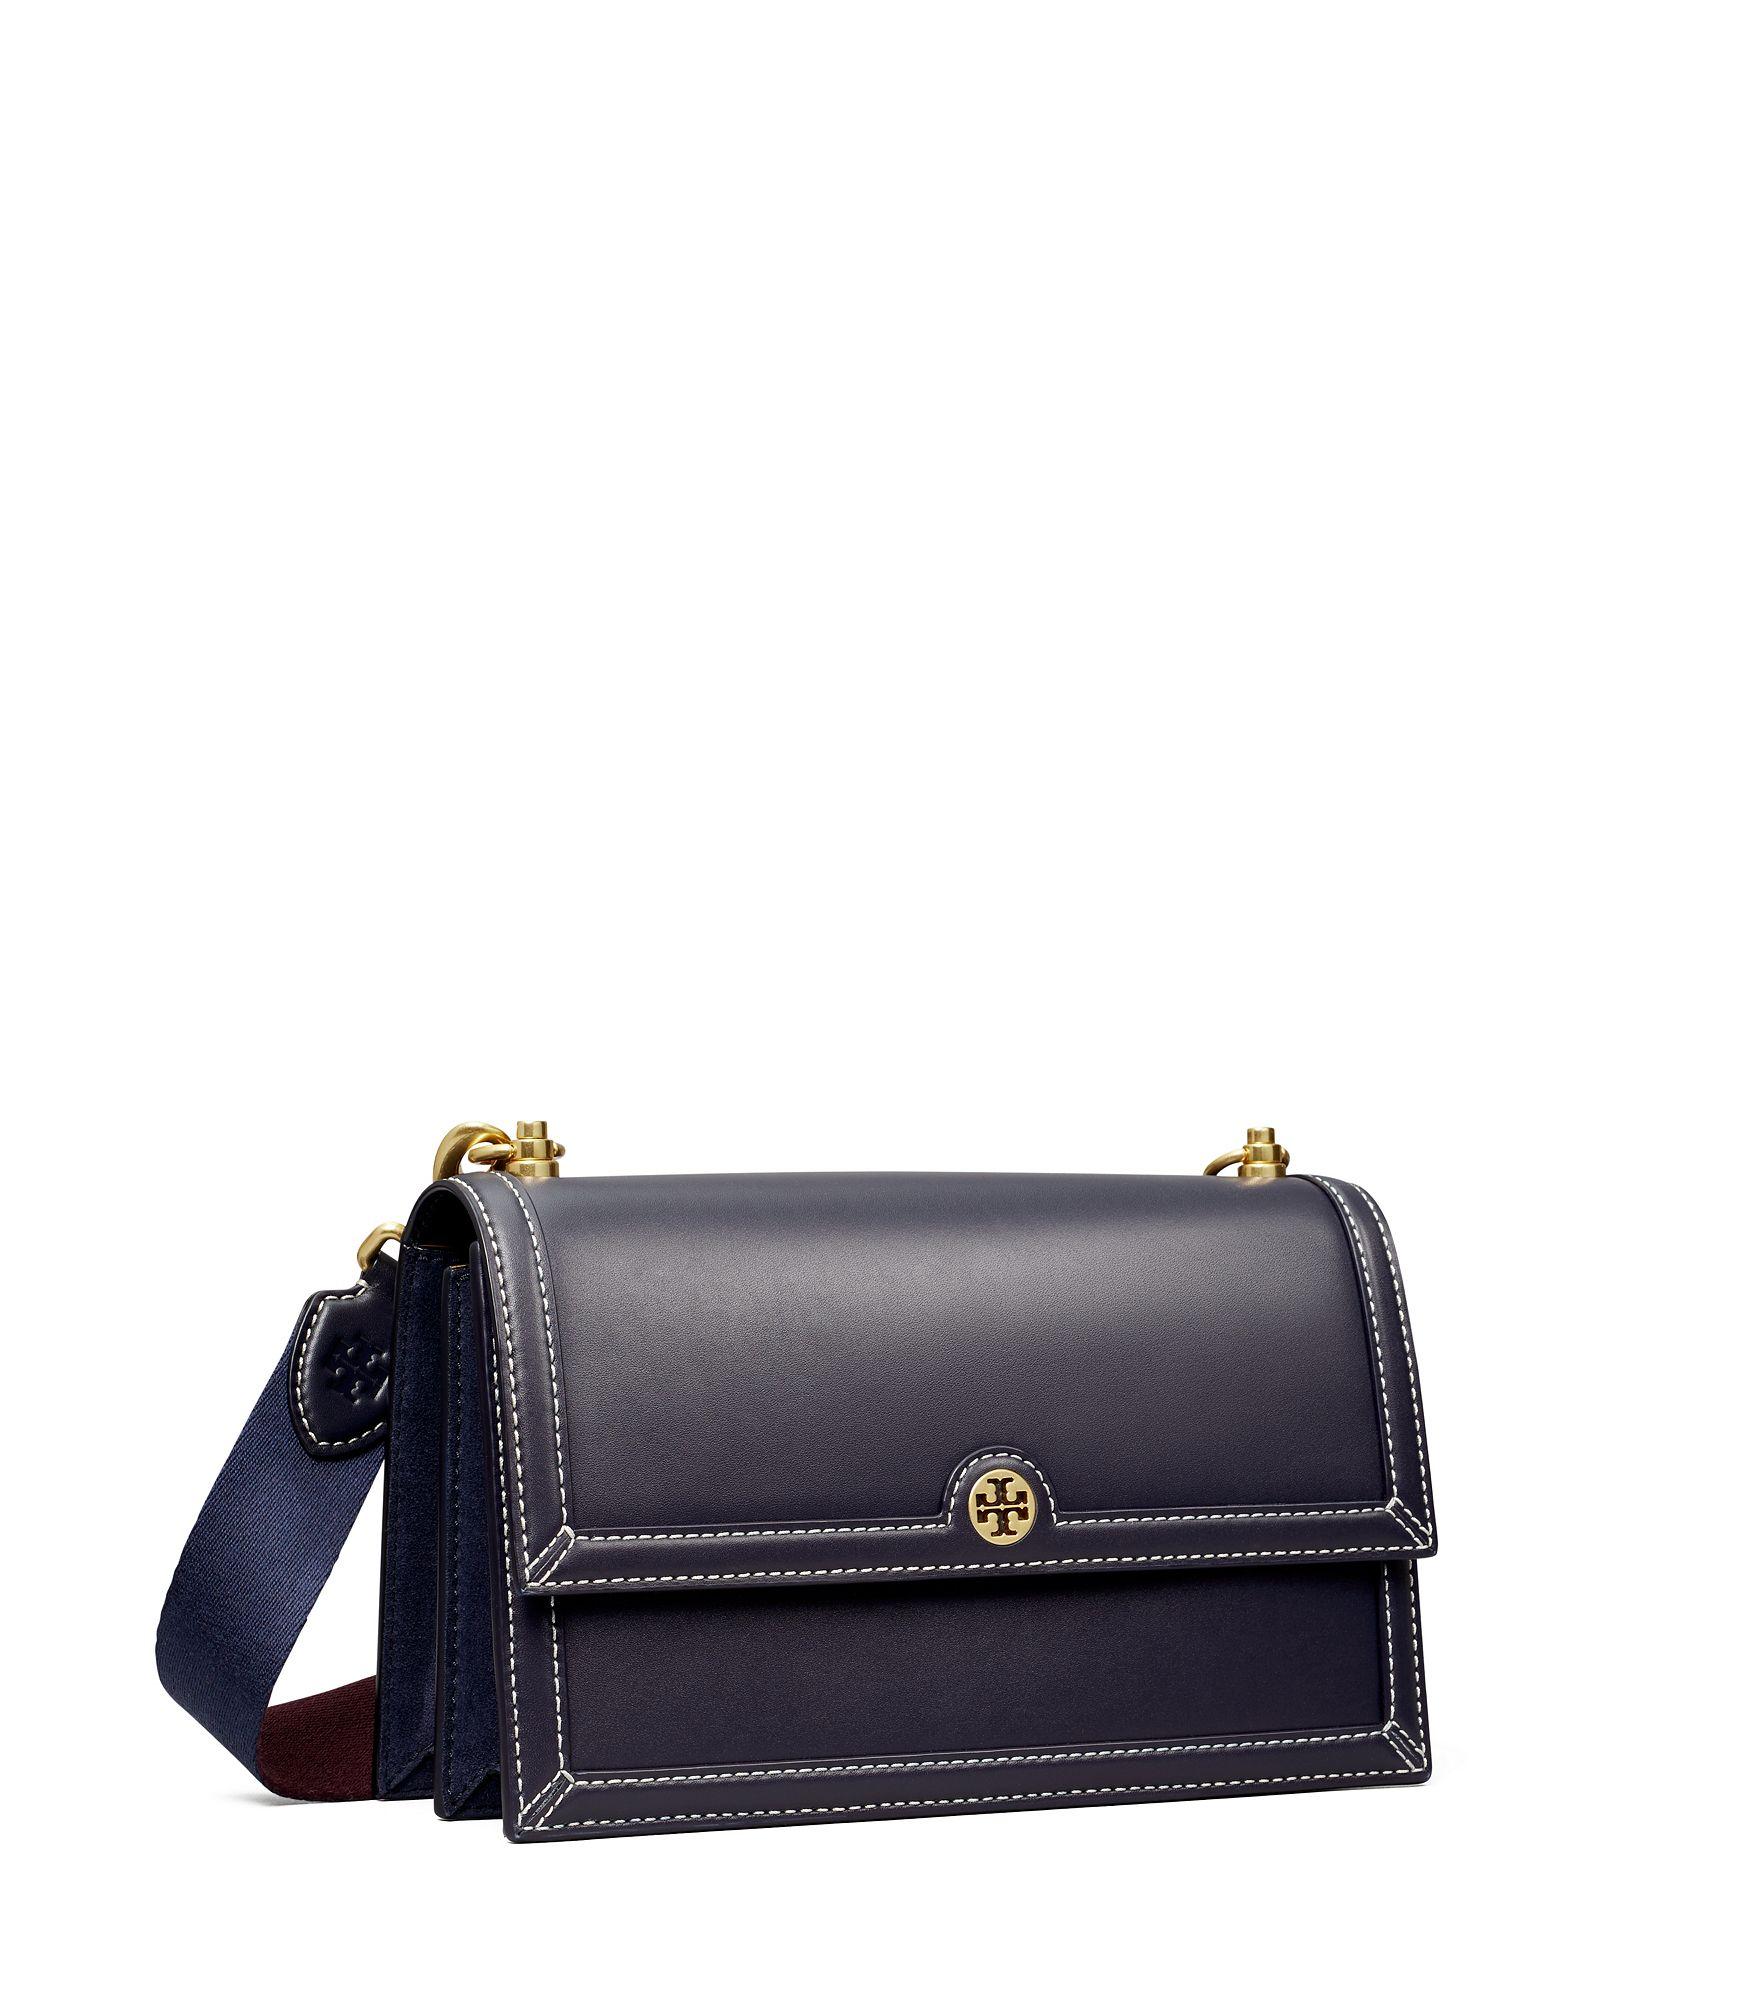 Tory Burch Leather Shoulder Bag in Brown | Lyst